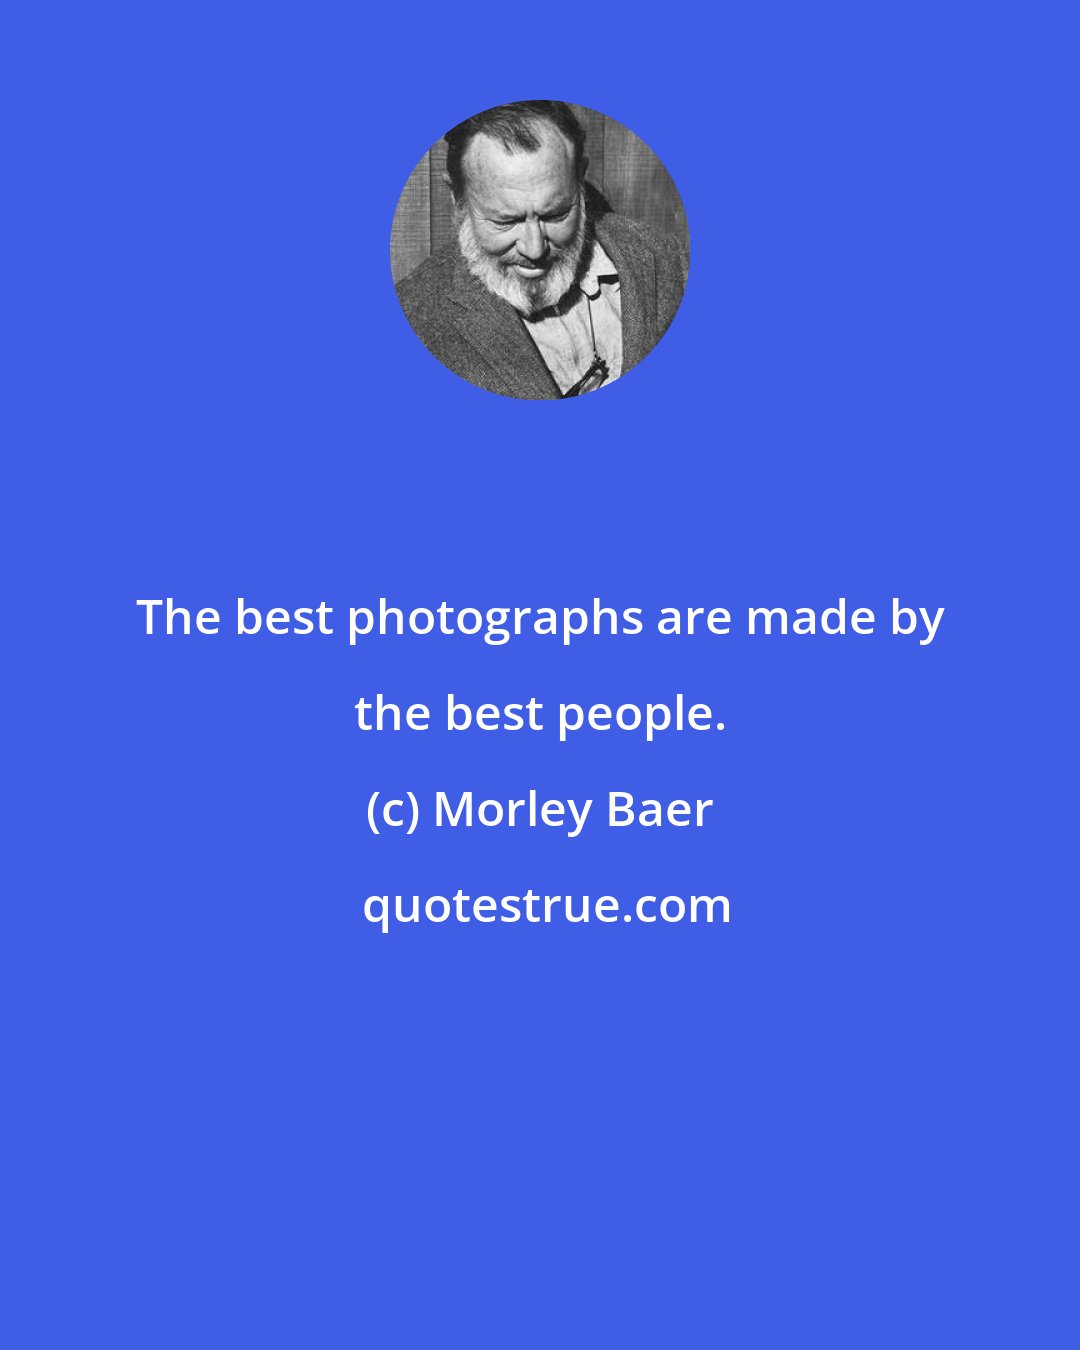 Morley Baer: The best photographs are made by the best people.